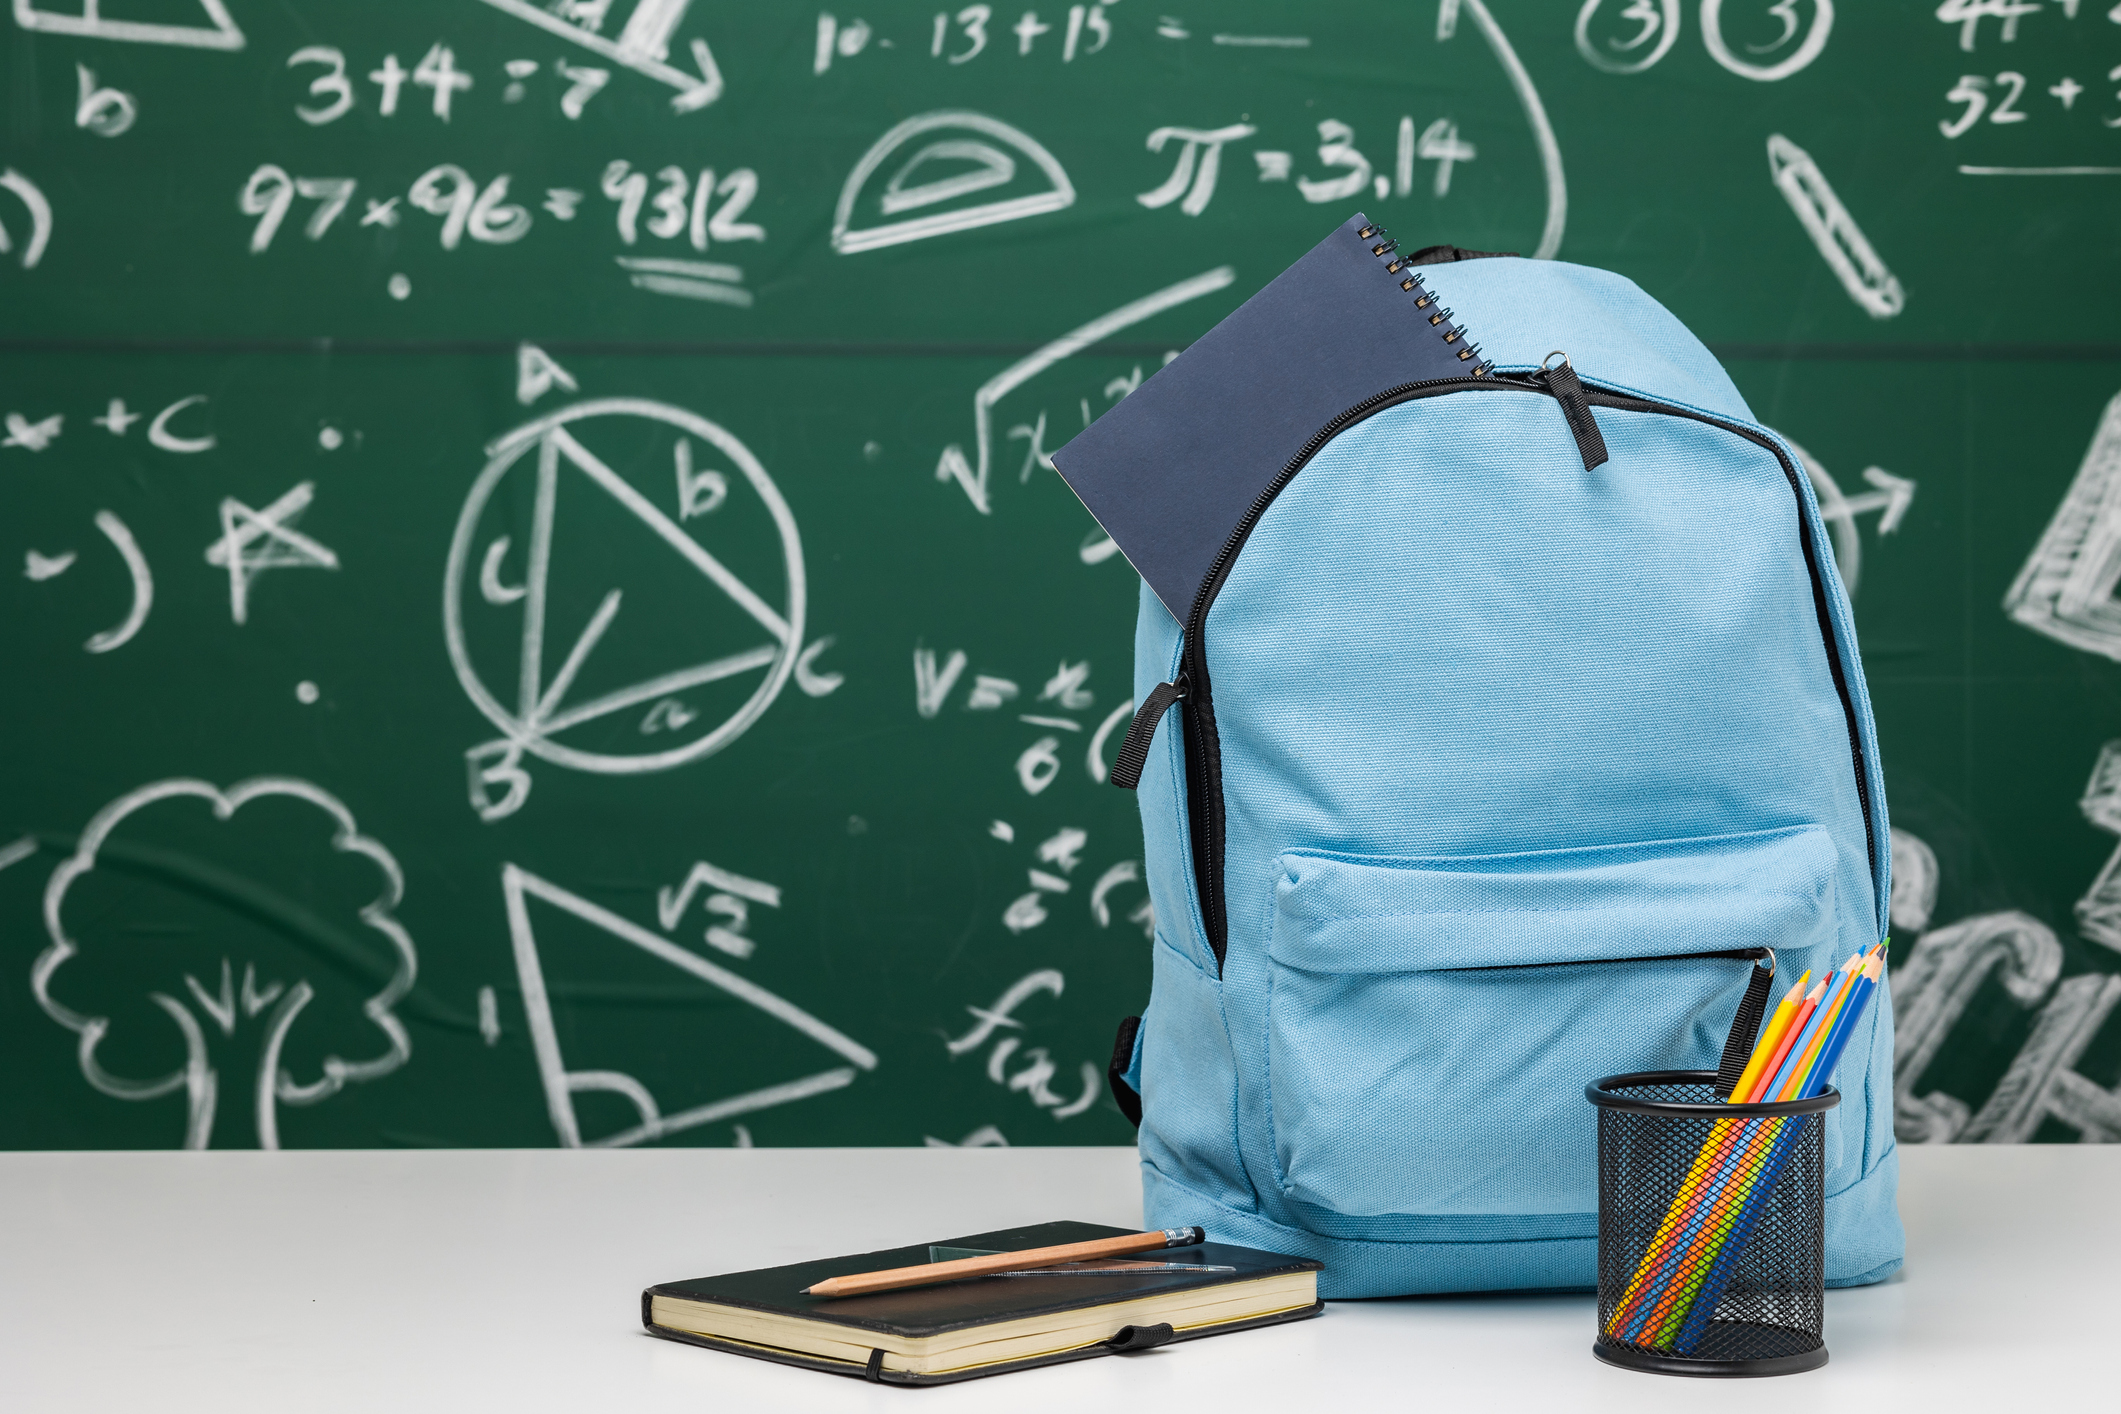 Back to school background. Stationery Supplies in the school bag. Banner design education On chalkboard with the Mathematical formula.